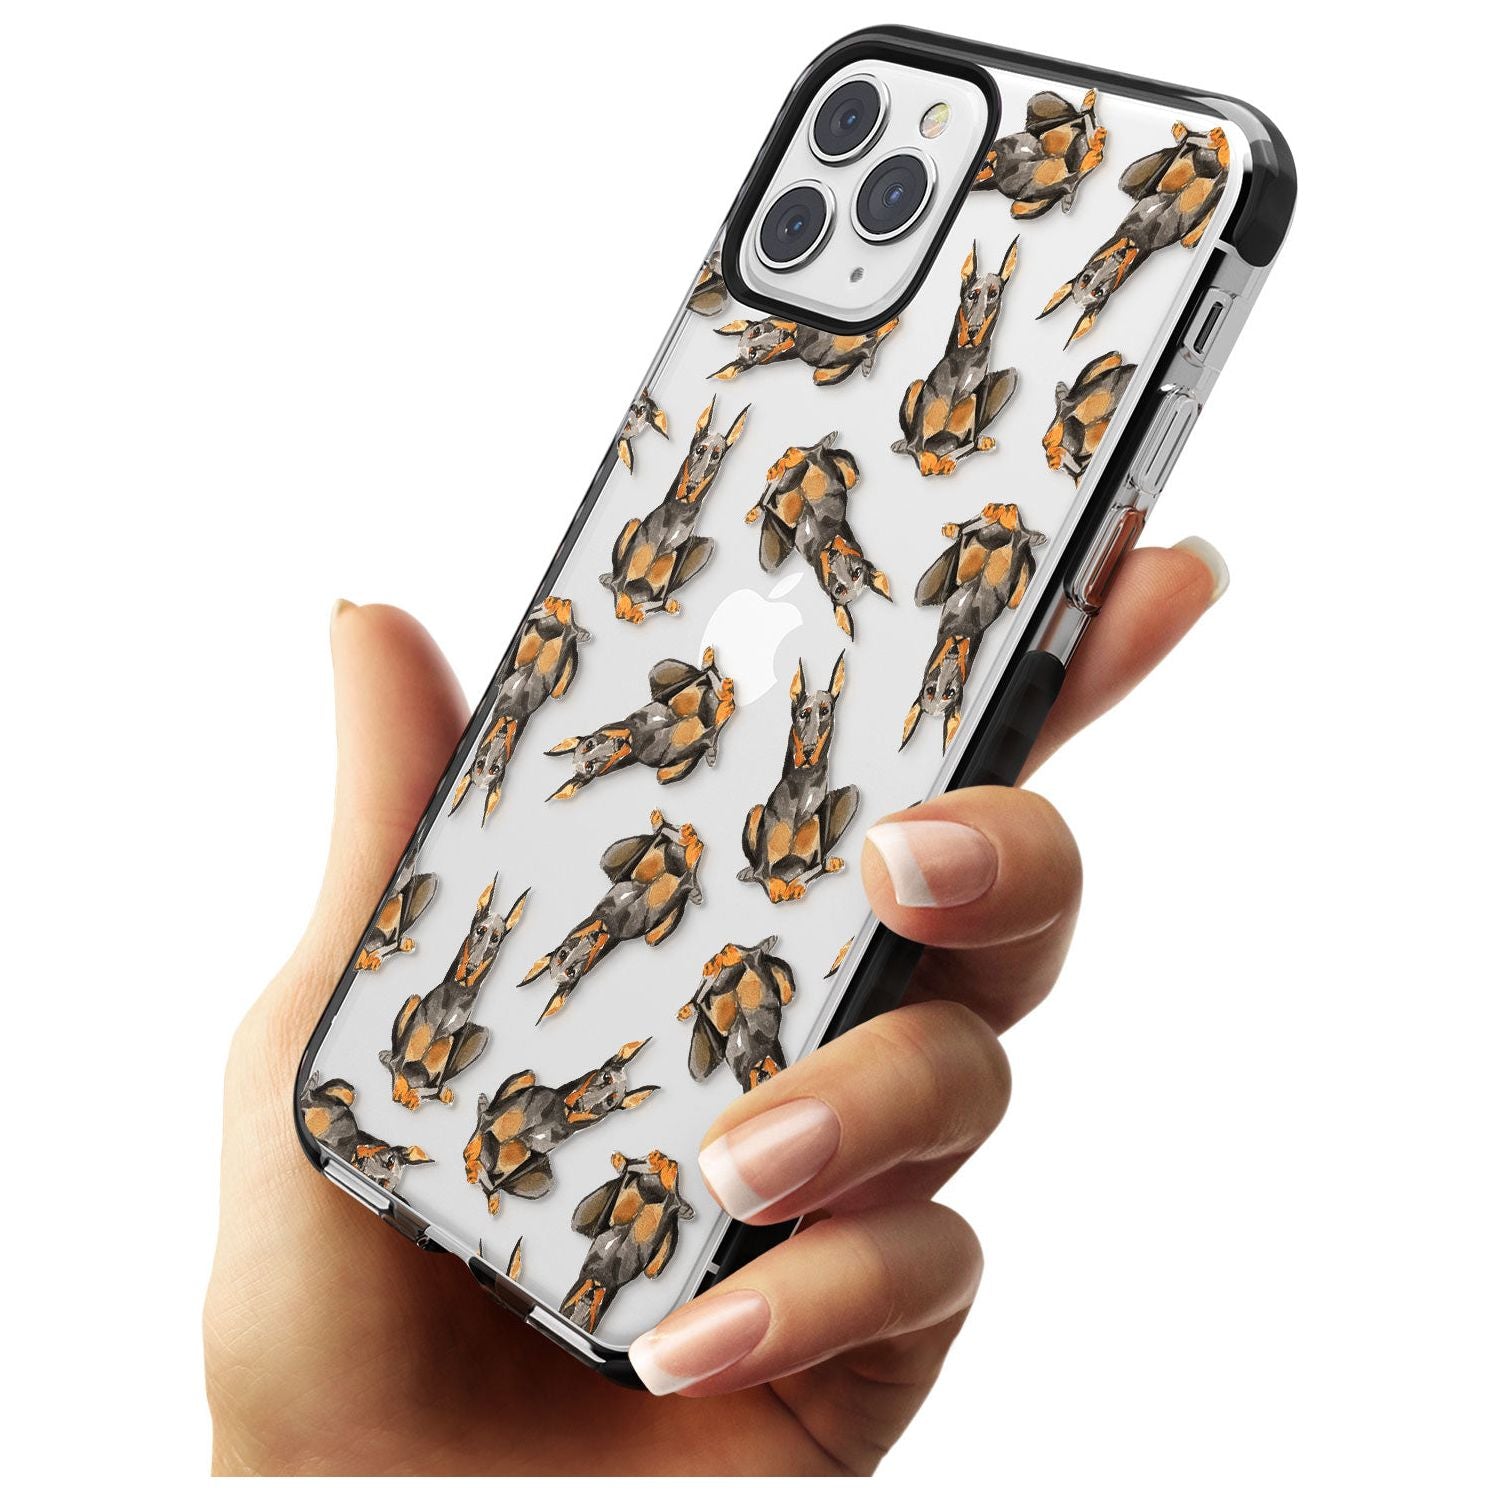 Doberman (Cropped) Watercolour Dog Pattern Black Impact Phone Case for iPhone 11 Pro Max